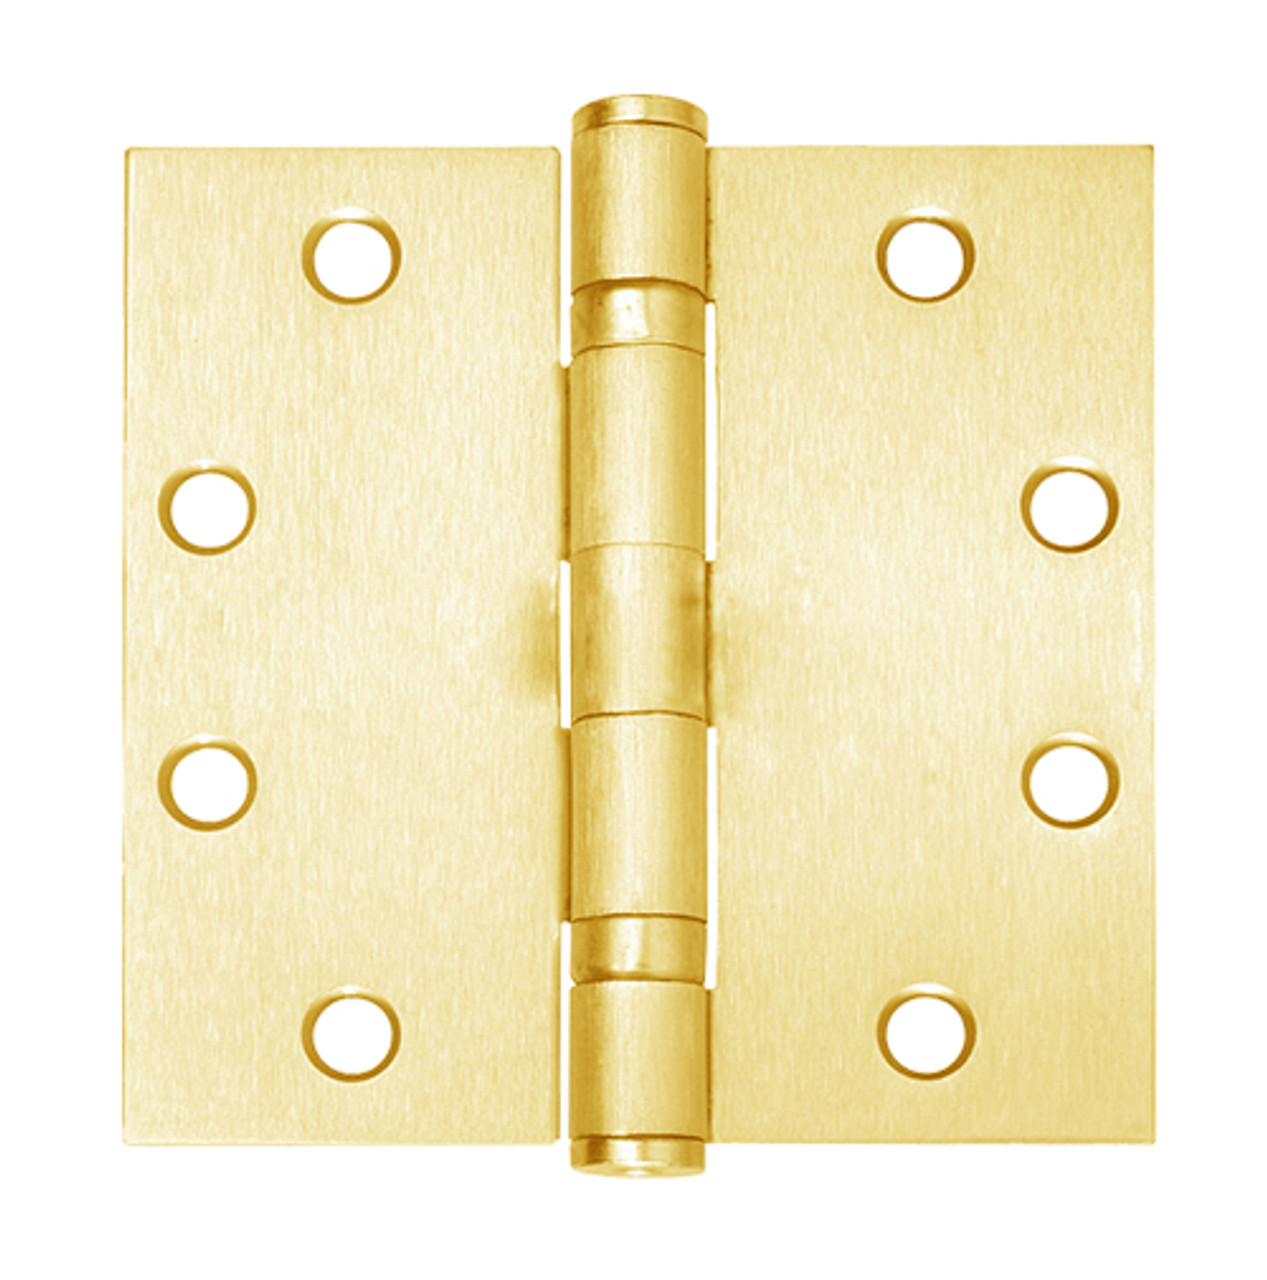 5BB1-5x4-5-605 IVES 5 Knuckle Ball Bearing Full Mortise Hinge in Bright Brass